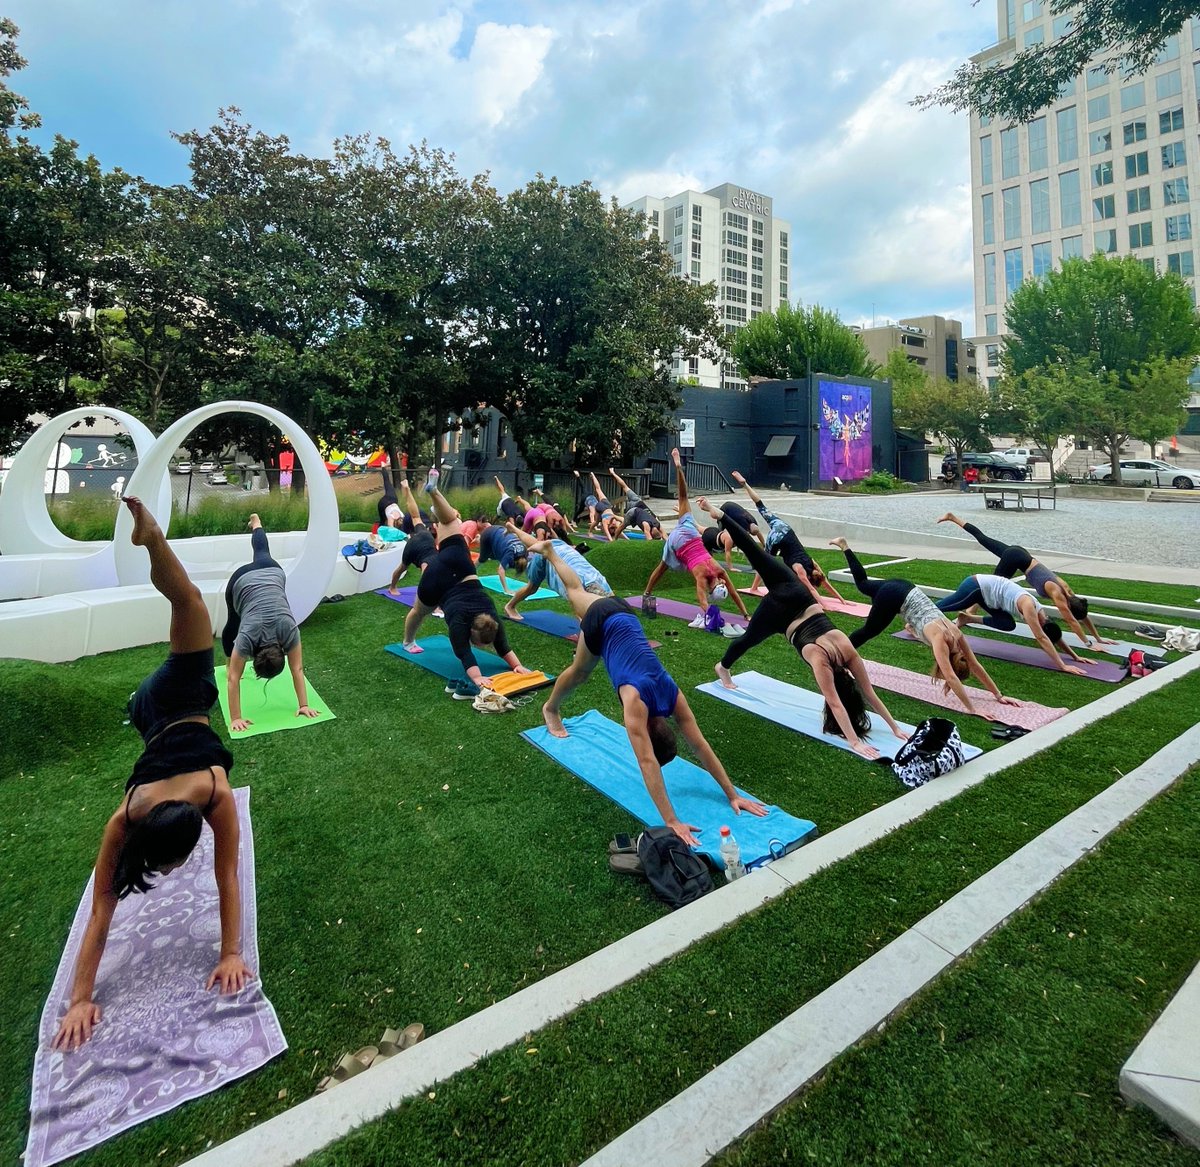 It's never too early to set your intentions for next week! Join us every Tuesday at 10th Street Park for Yoga Flow! 🌿 Come de-stress and connect with your Midtown community. All skill levels. BYO mat & water. 🕕 6-7pm 📍10th Street Park 🙏 in partnership with @evolationyogATL